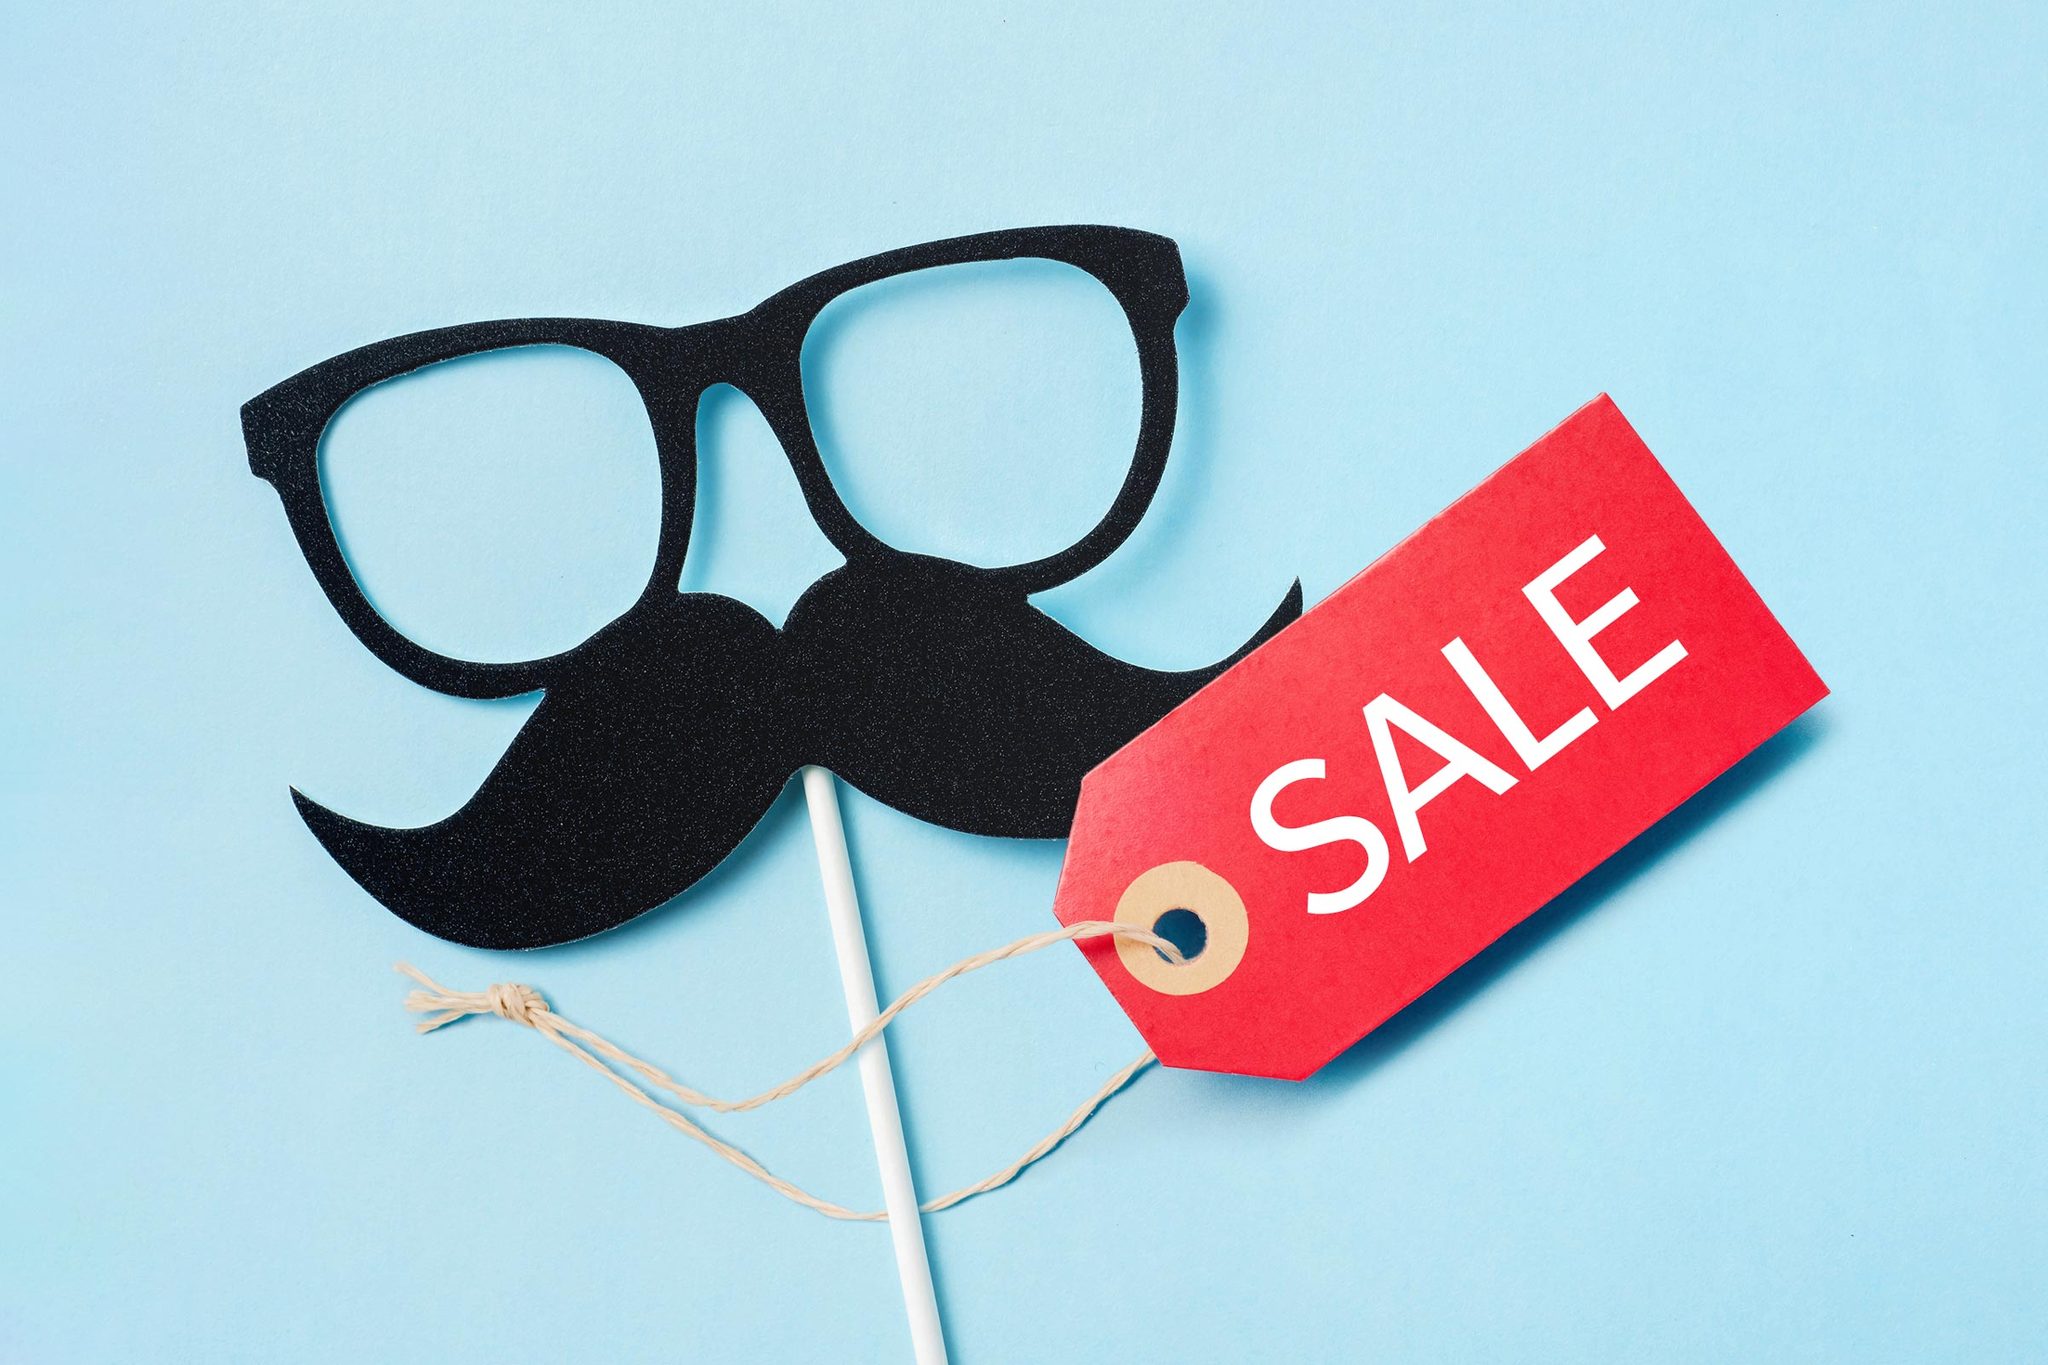 Fathers Day photo prop with glasses and a mustache with a red tag that reads "SALE" on blue background